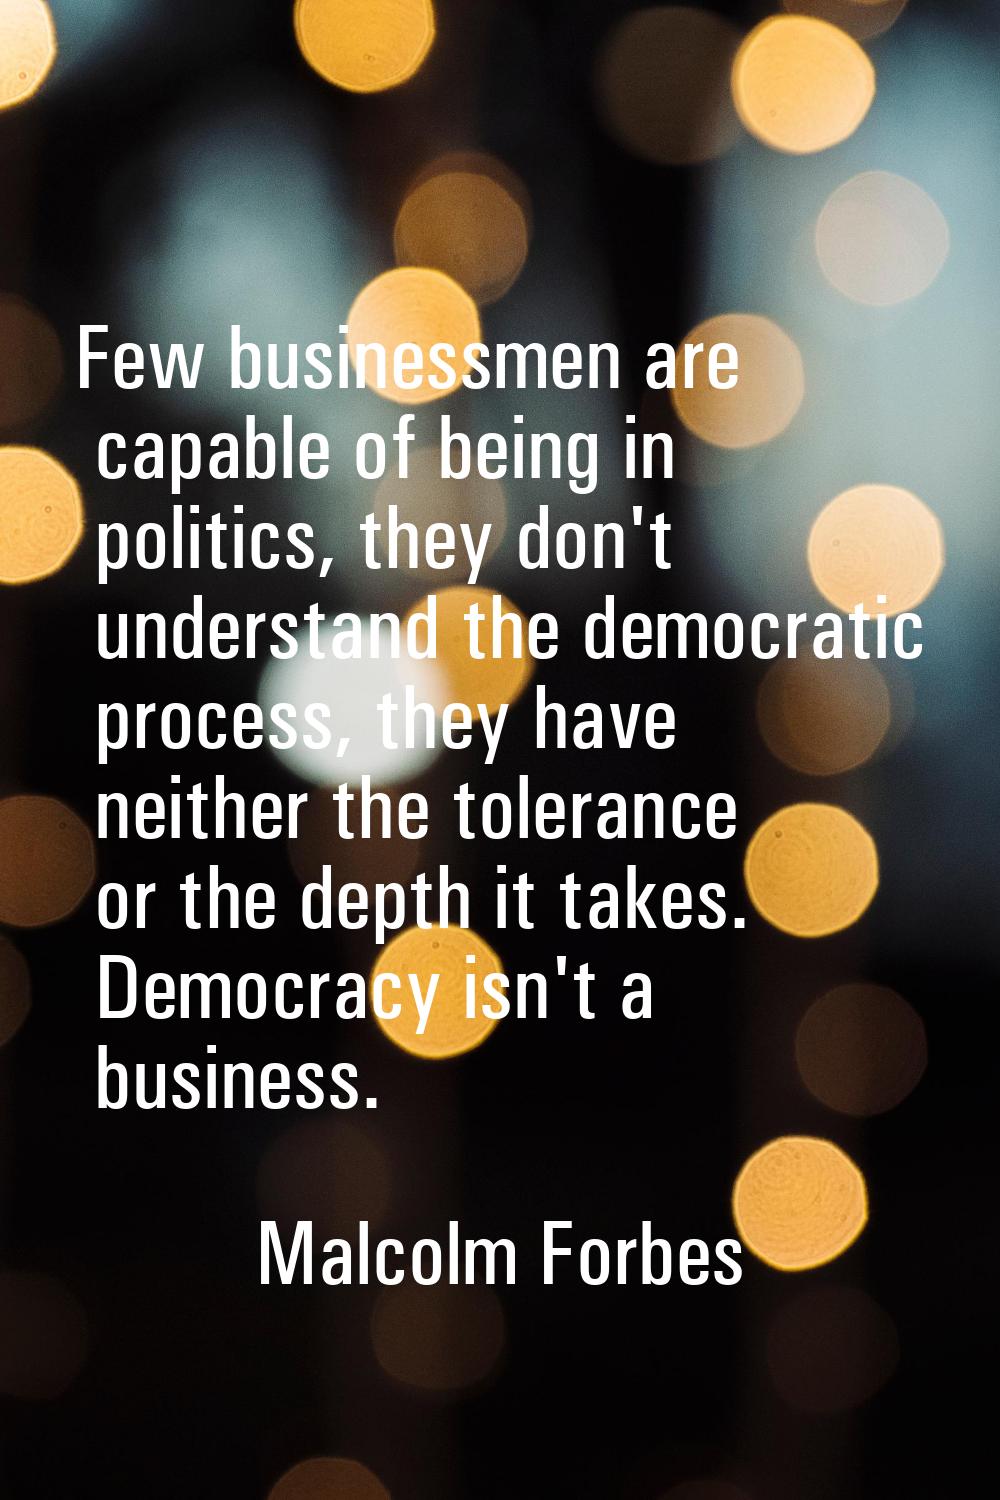 Few businessmen are capable of being in politics, they don't understand the democratic process, the